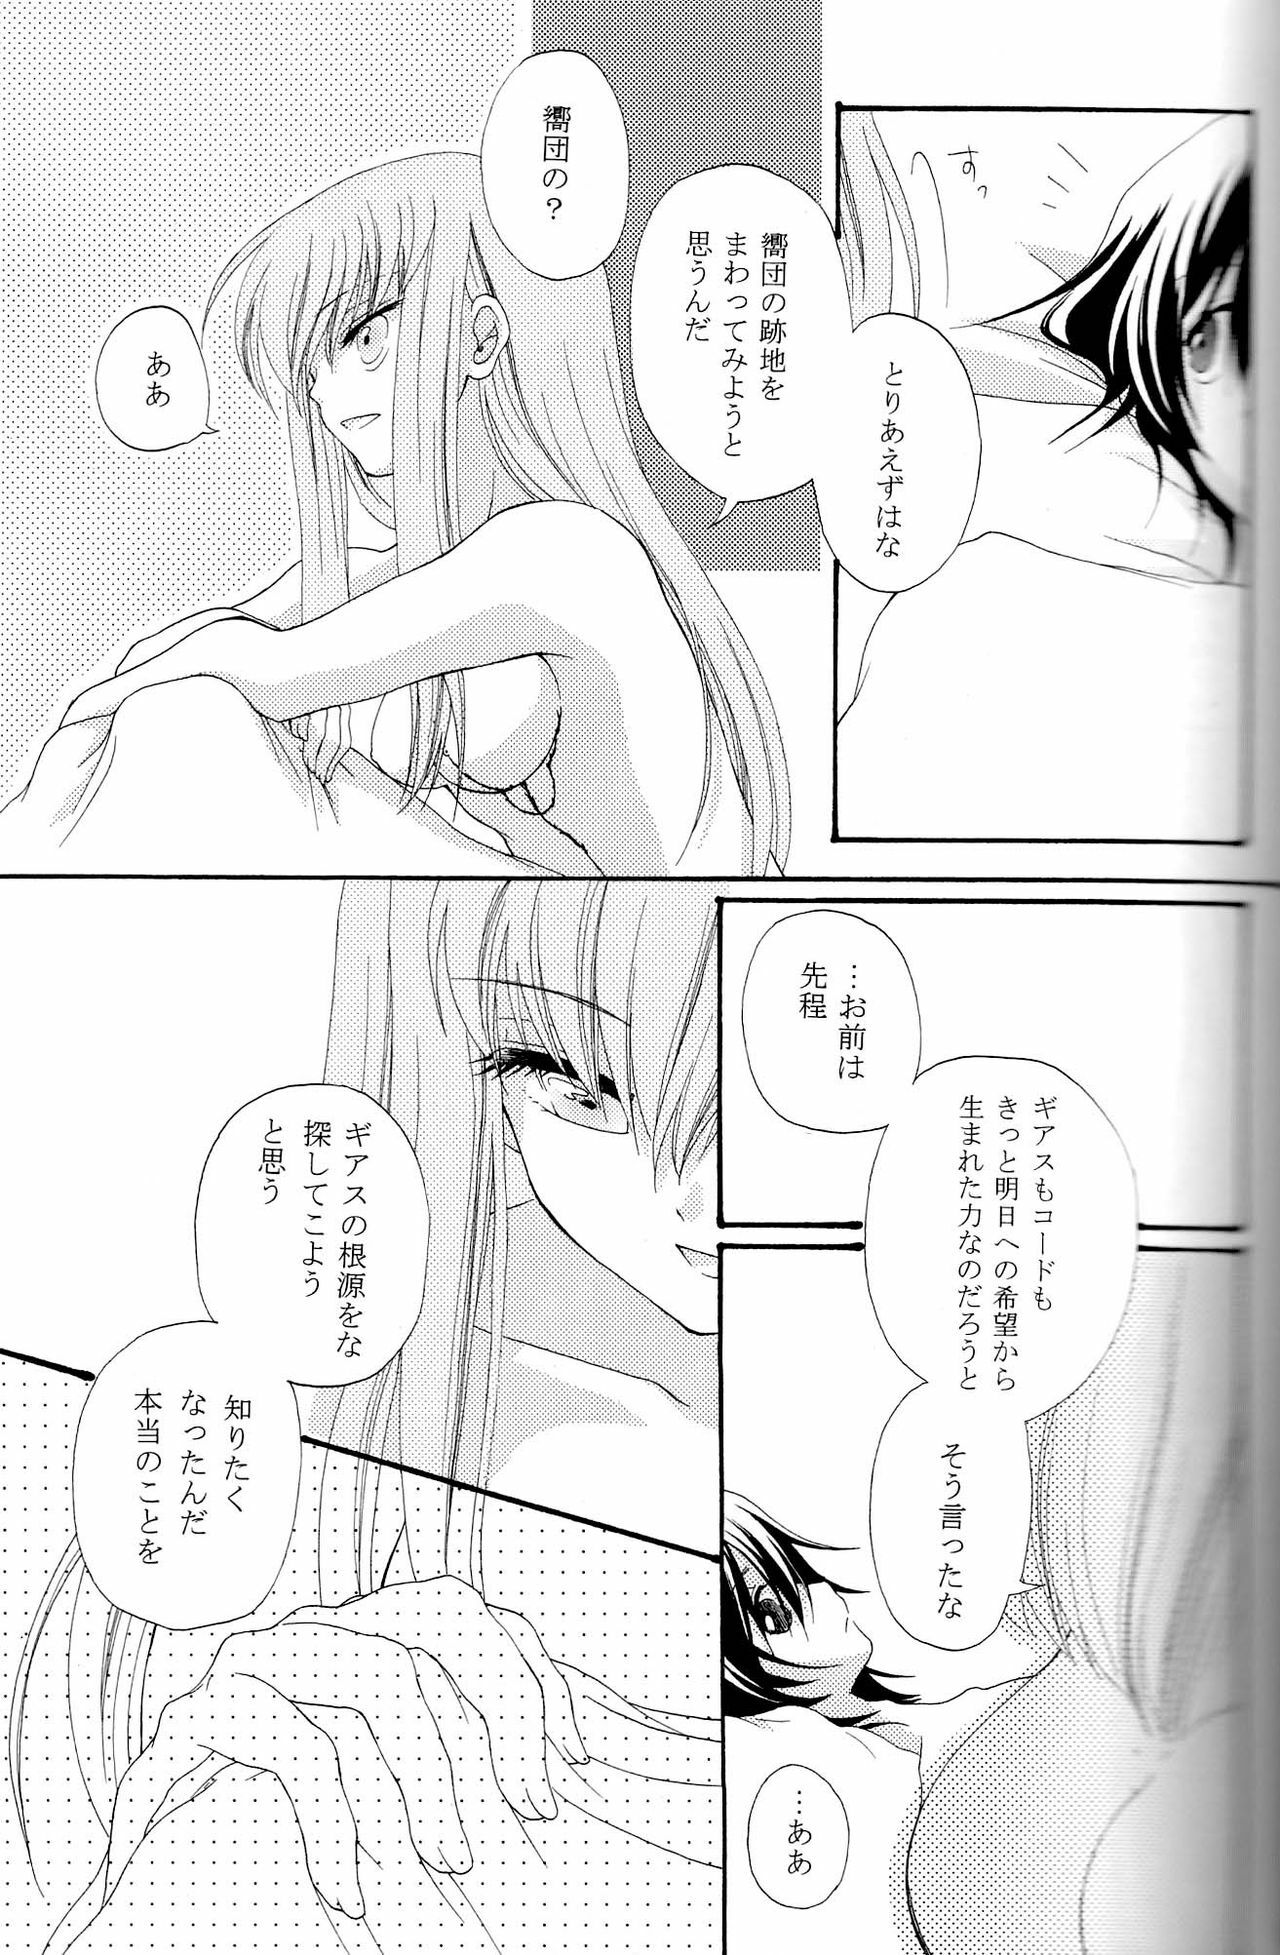 [APRICOT TEA] The last love letter presented to my dear only partner. (Code Geass) page 22 full